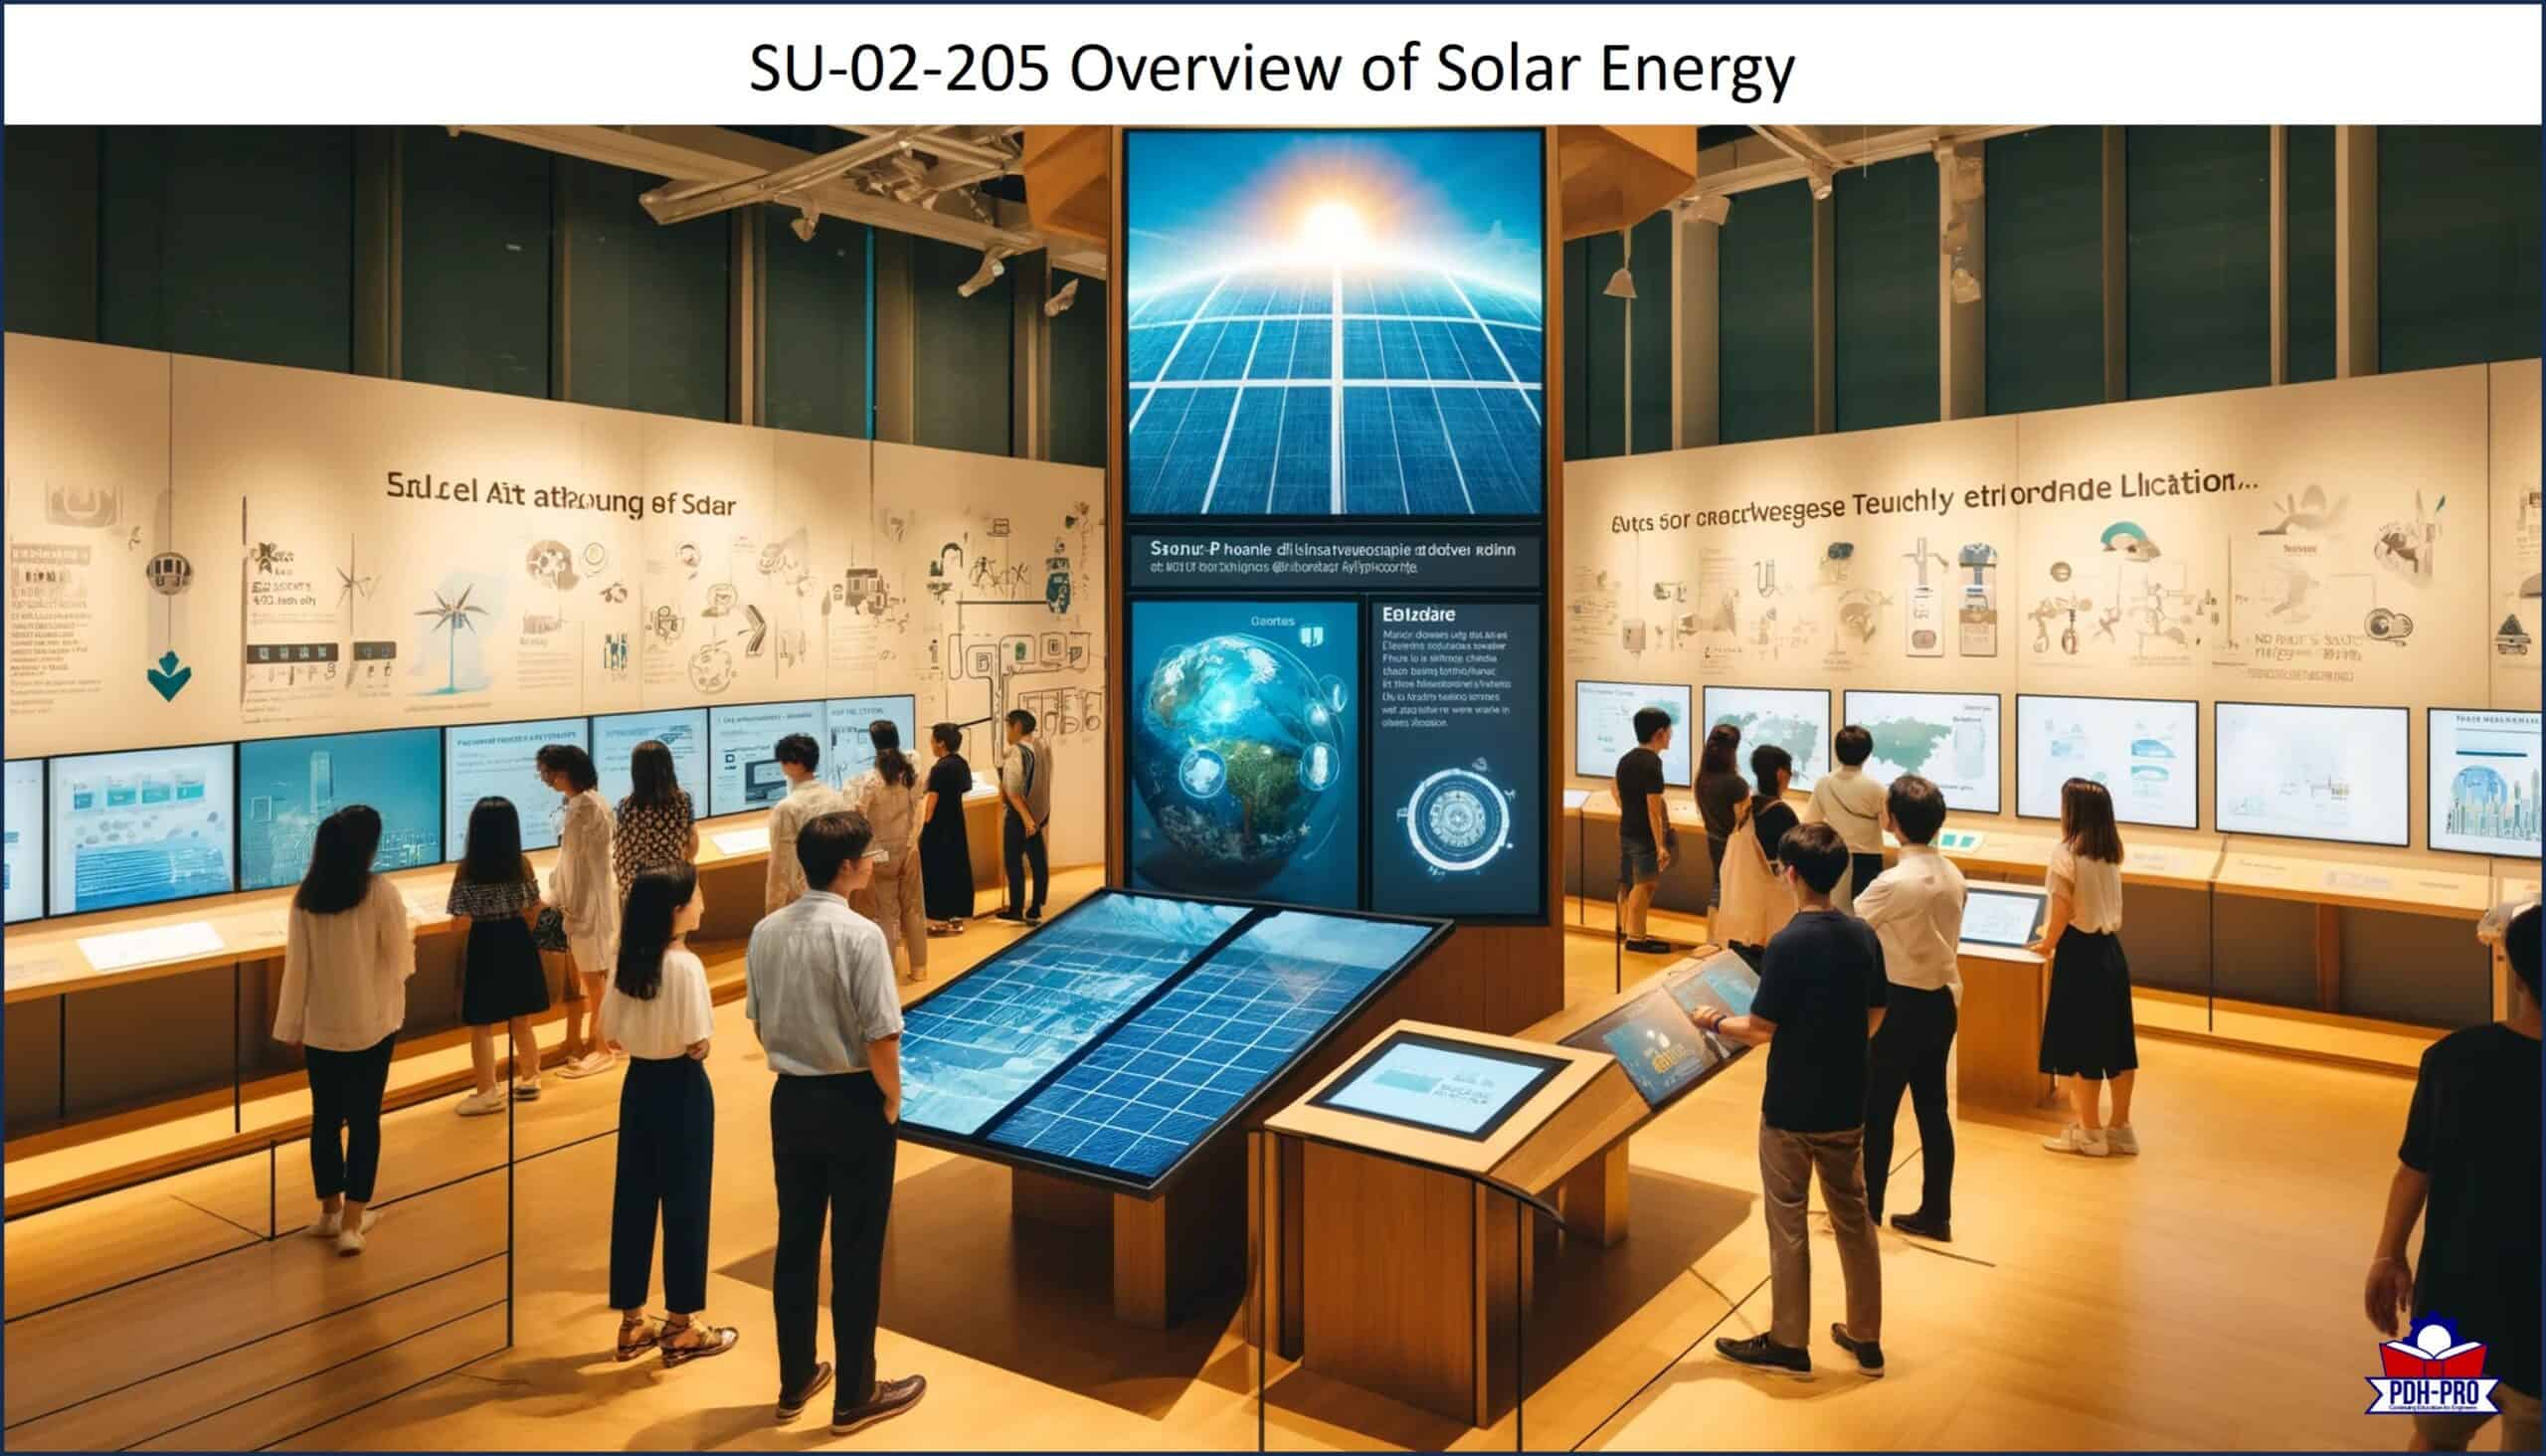 Overview of Solar Energy